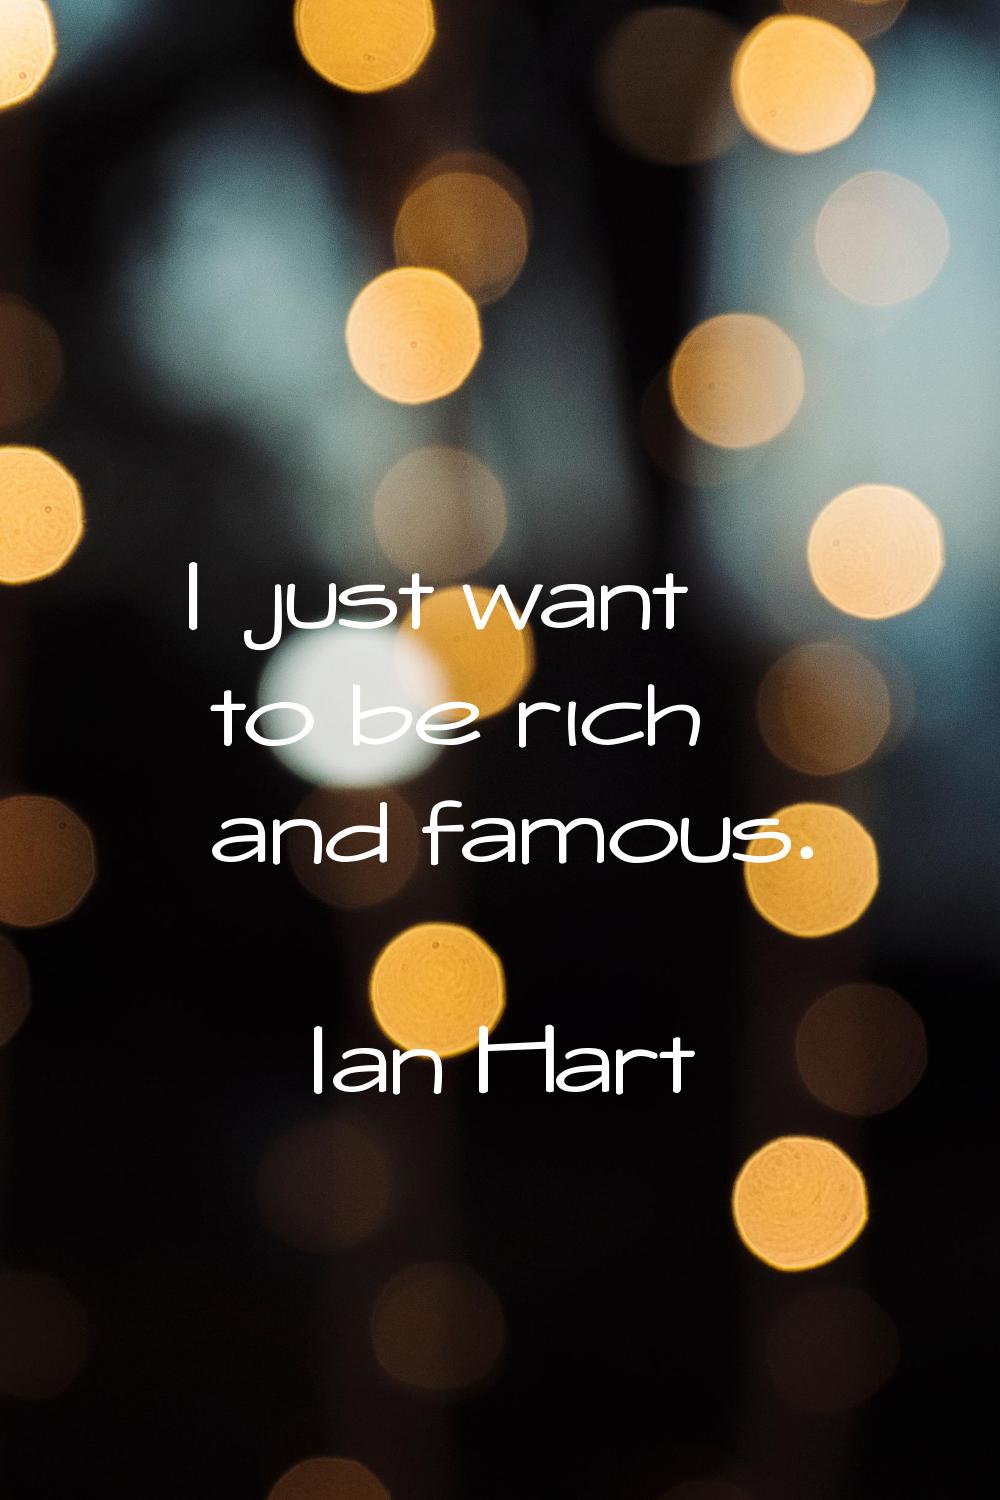 I just want to be rich and famous.